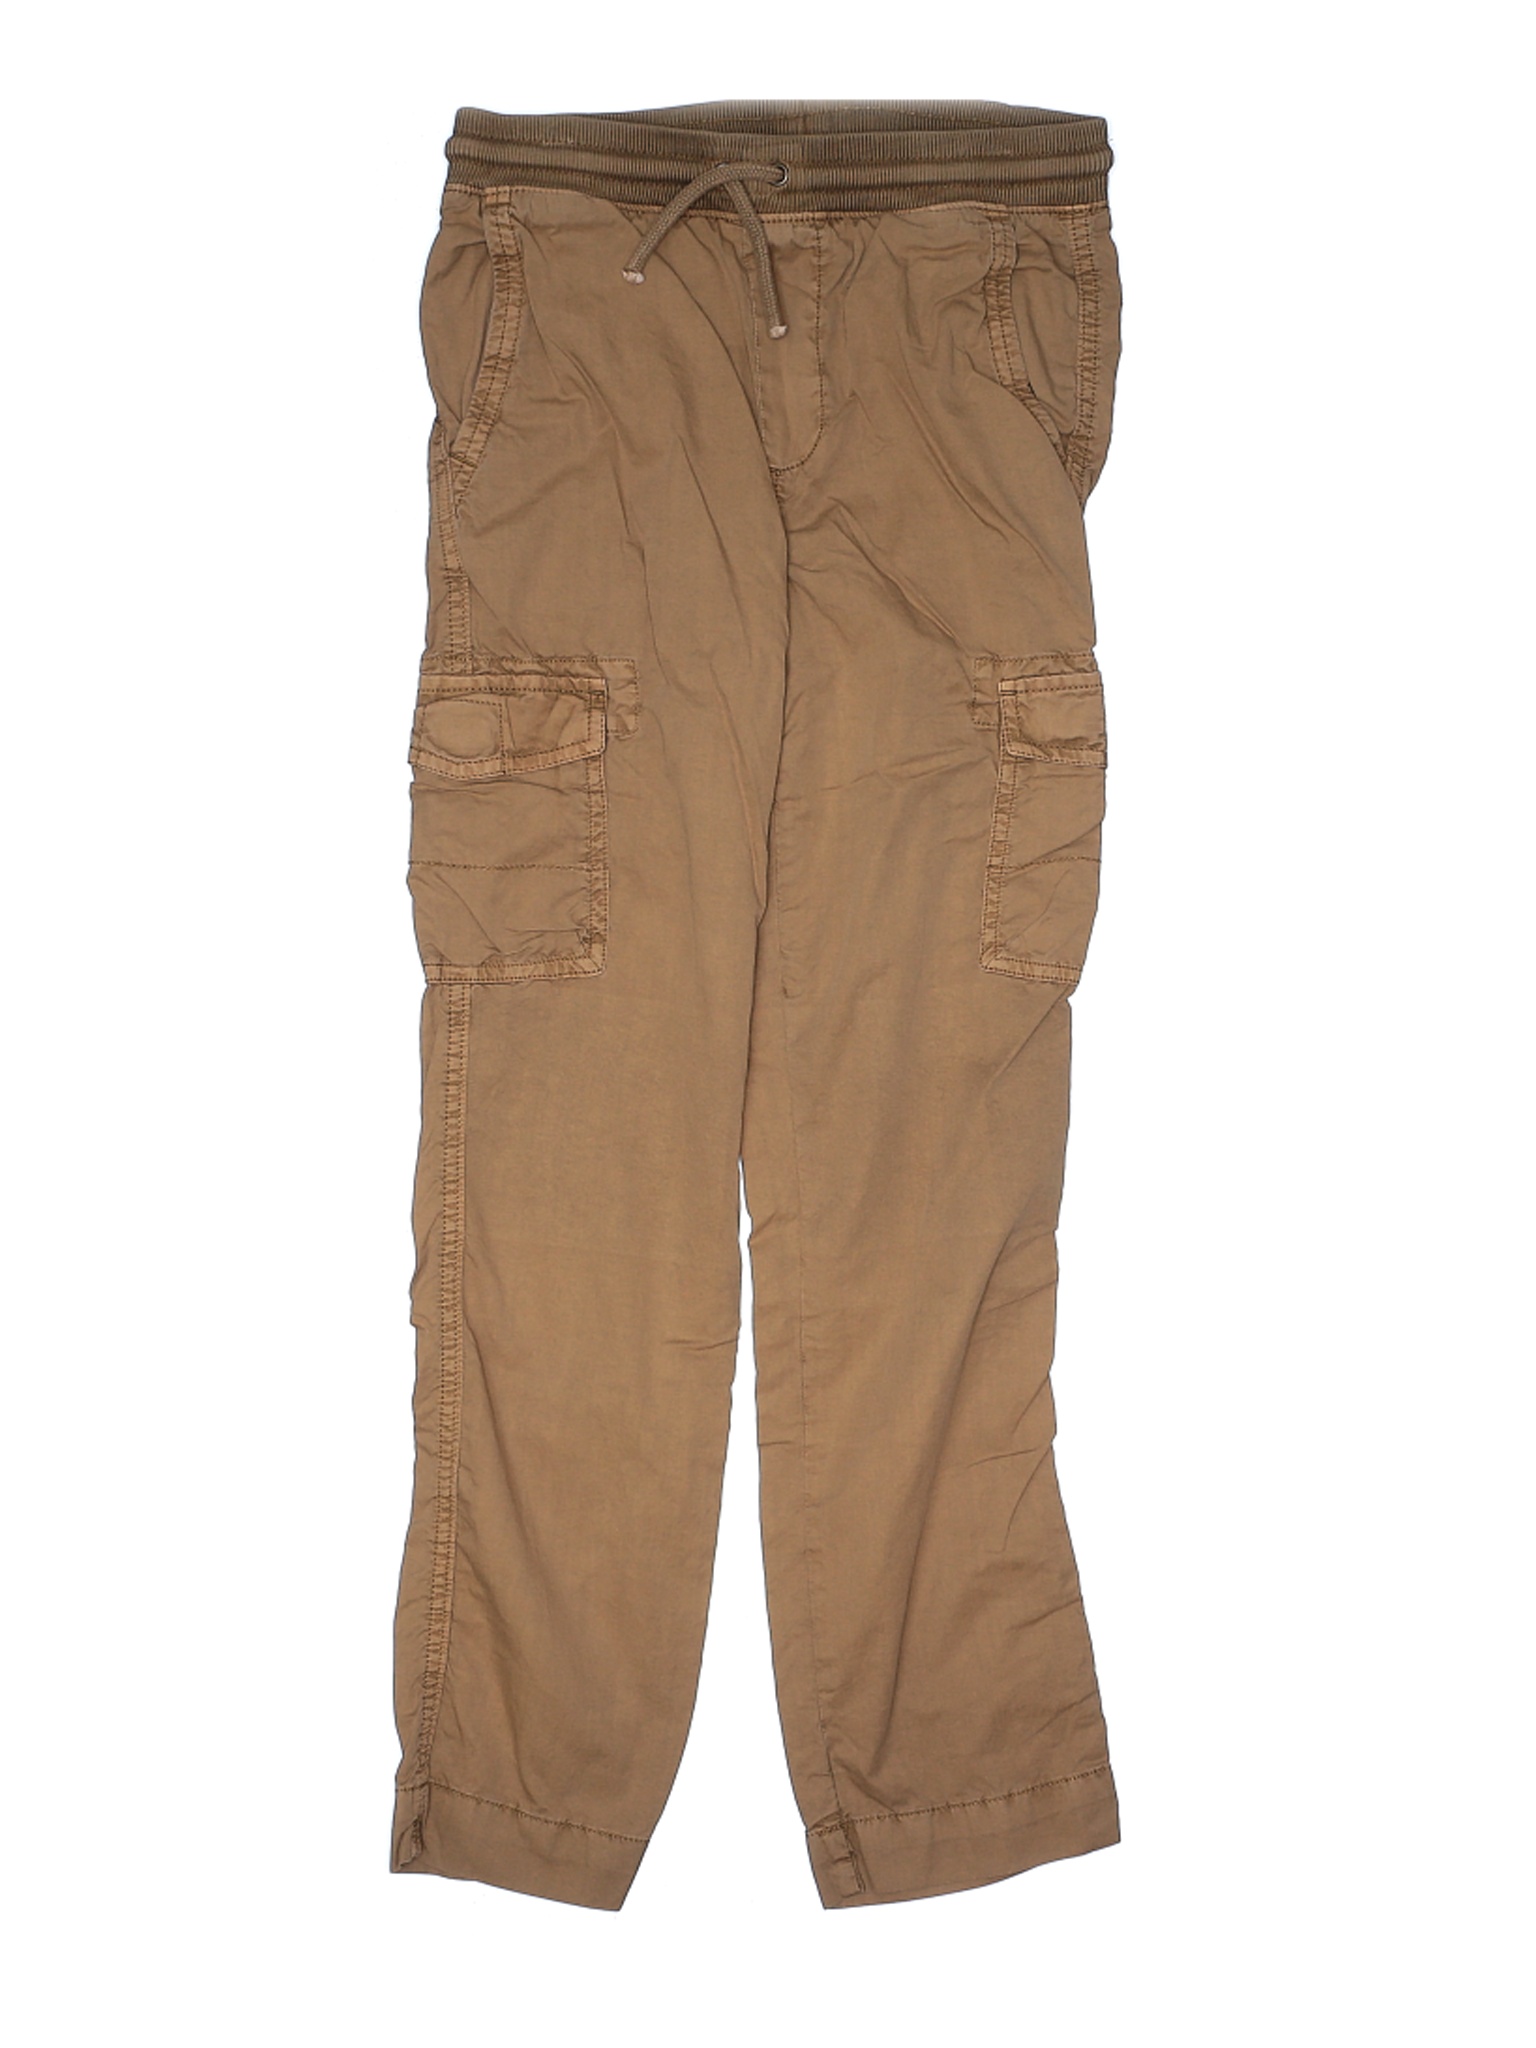 Urban Pipeline Solid Brown Tan Cargo Pants Size M (Kids) - 61% off ...